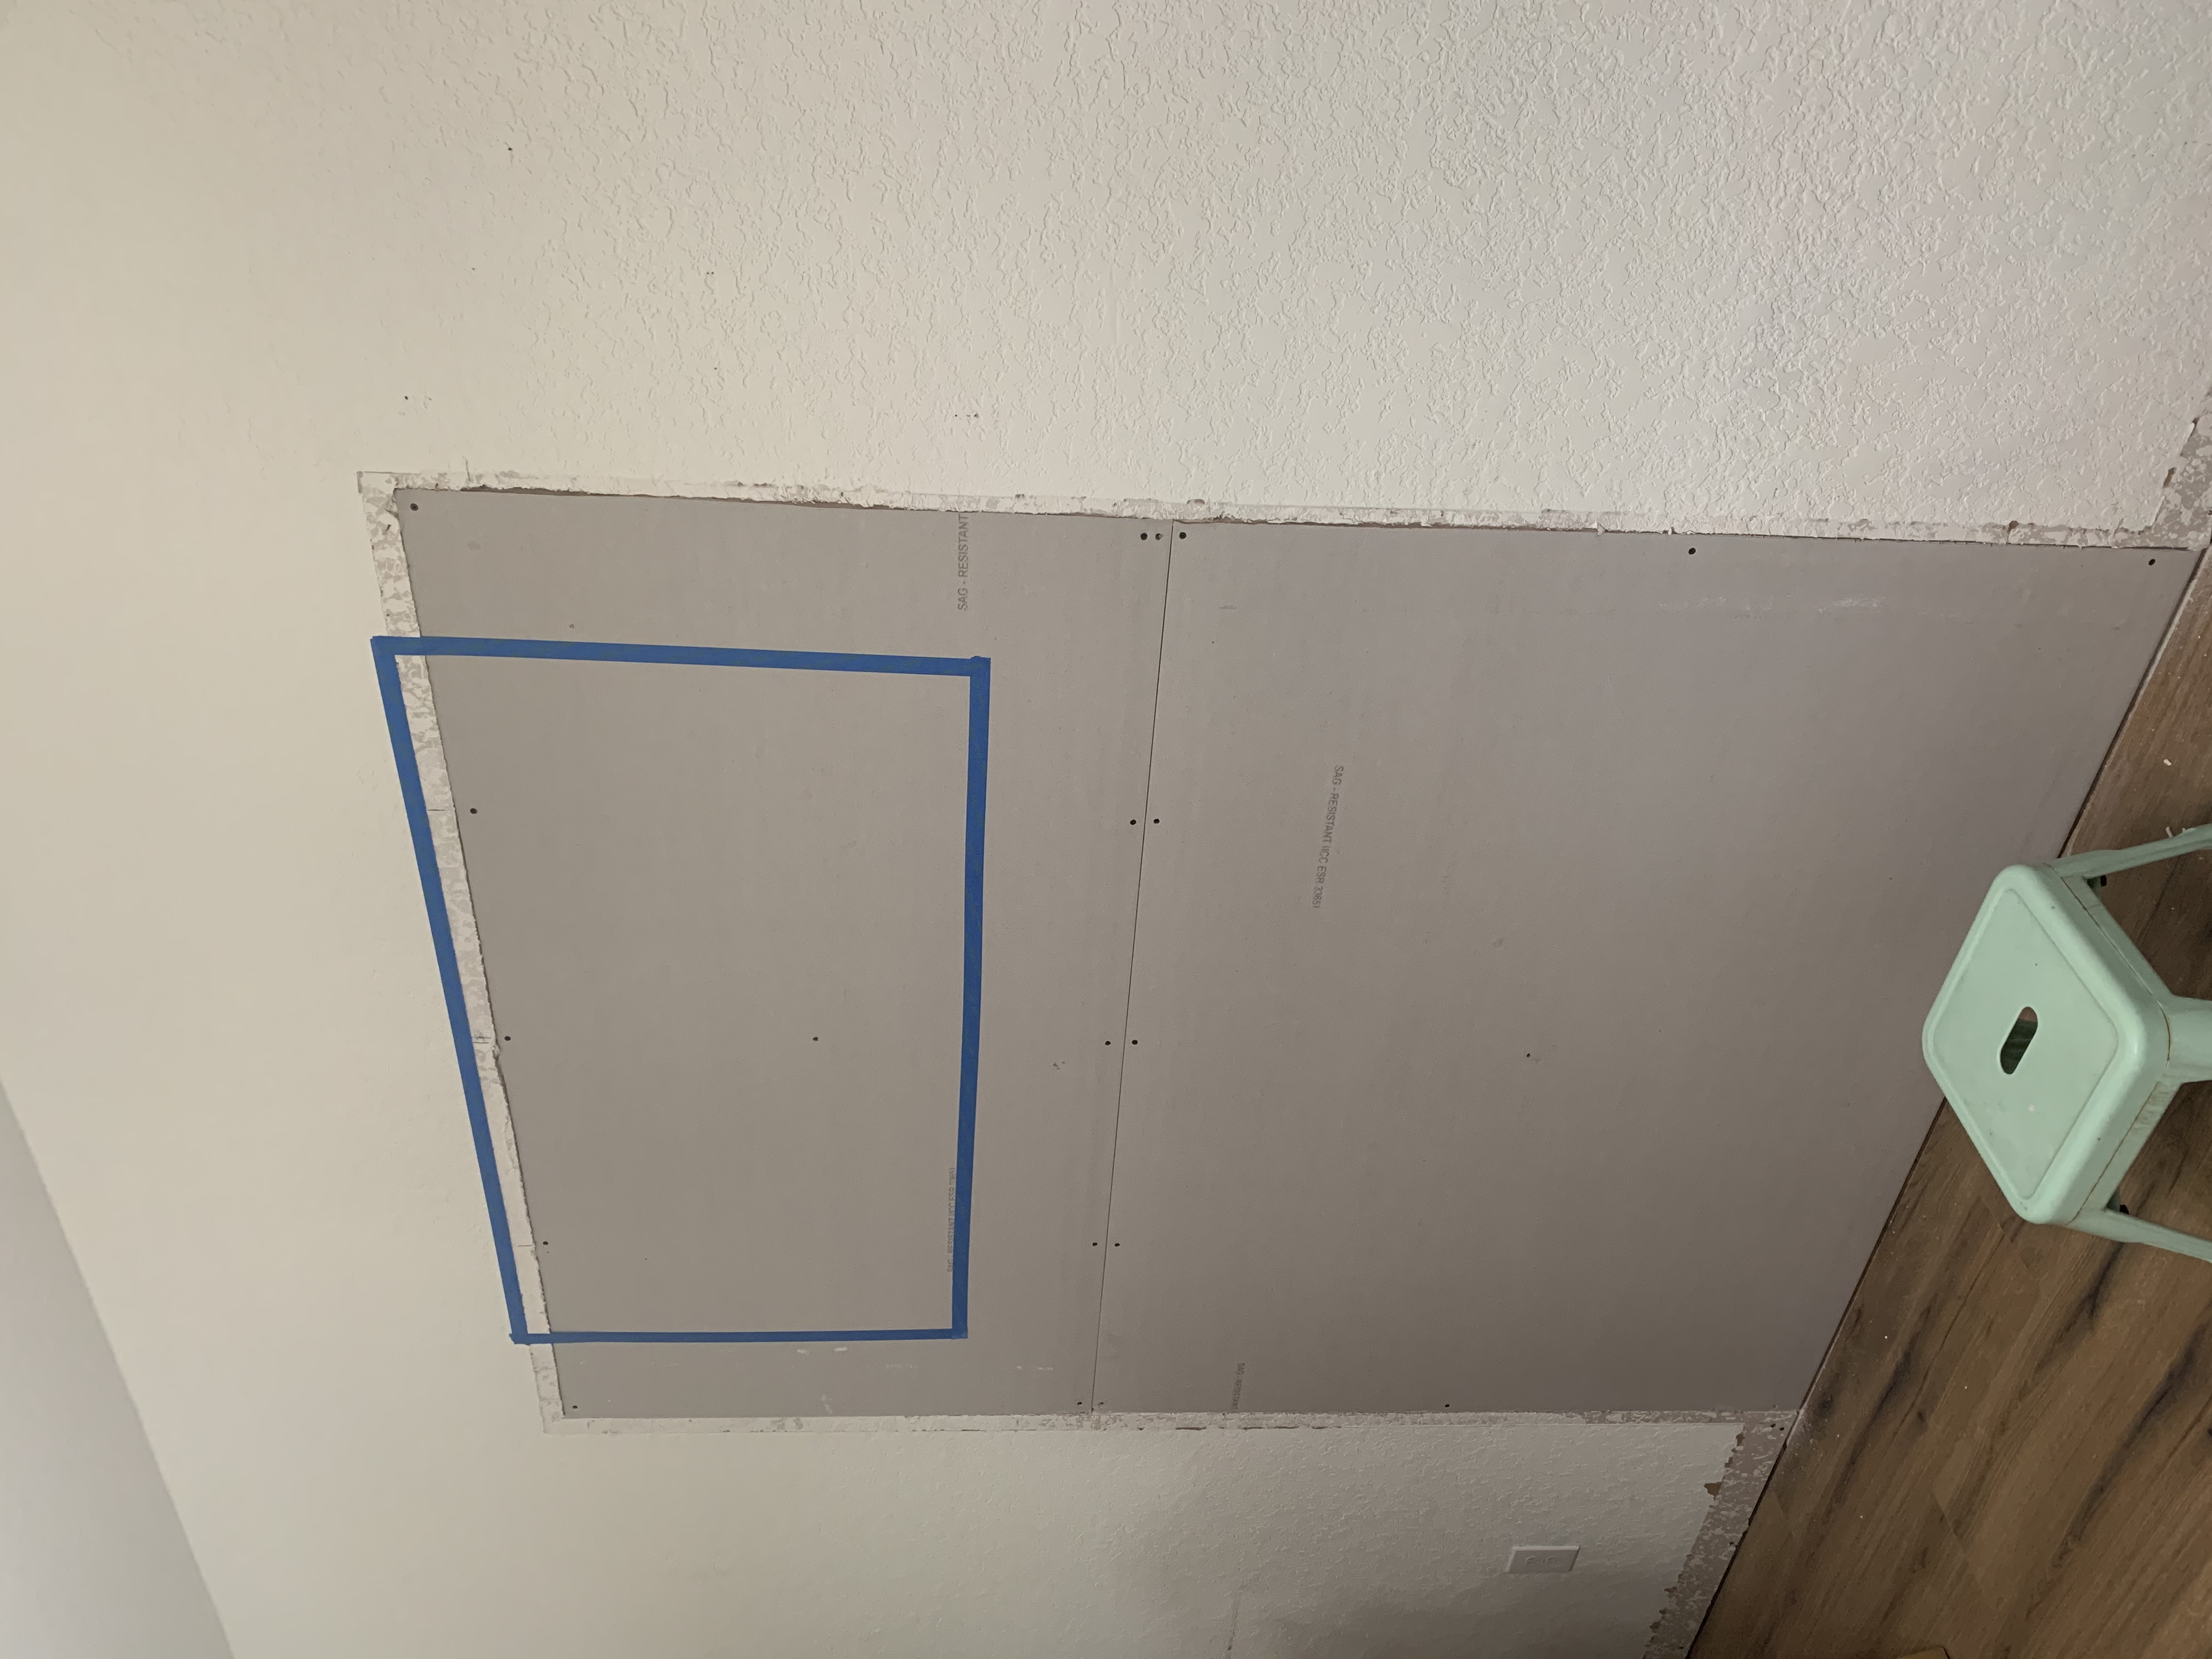 drywalling and closing up an opening on a wall